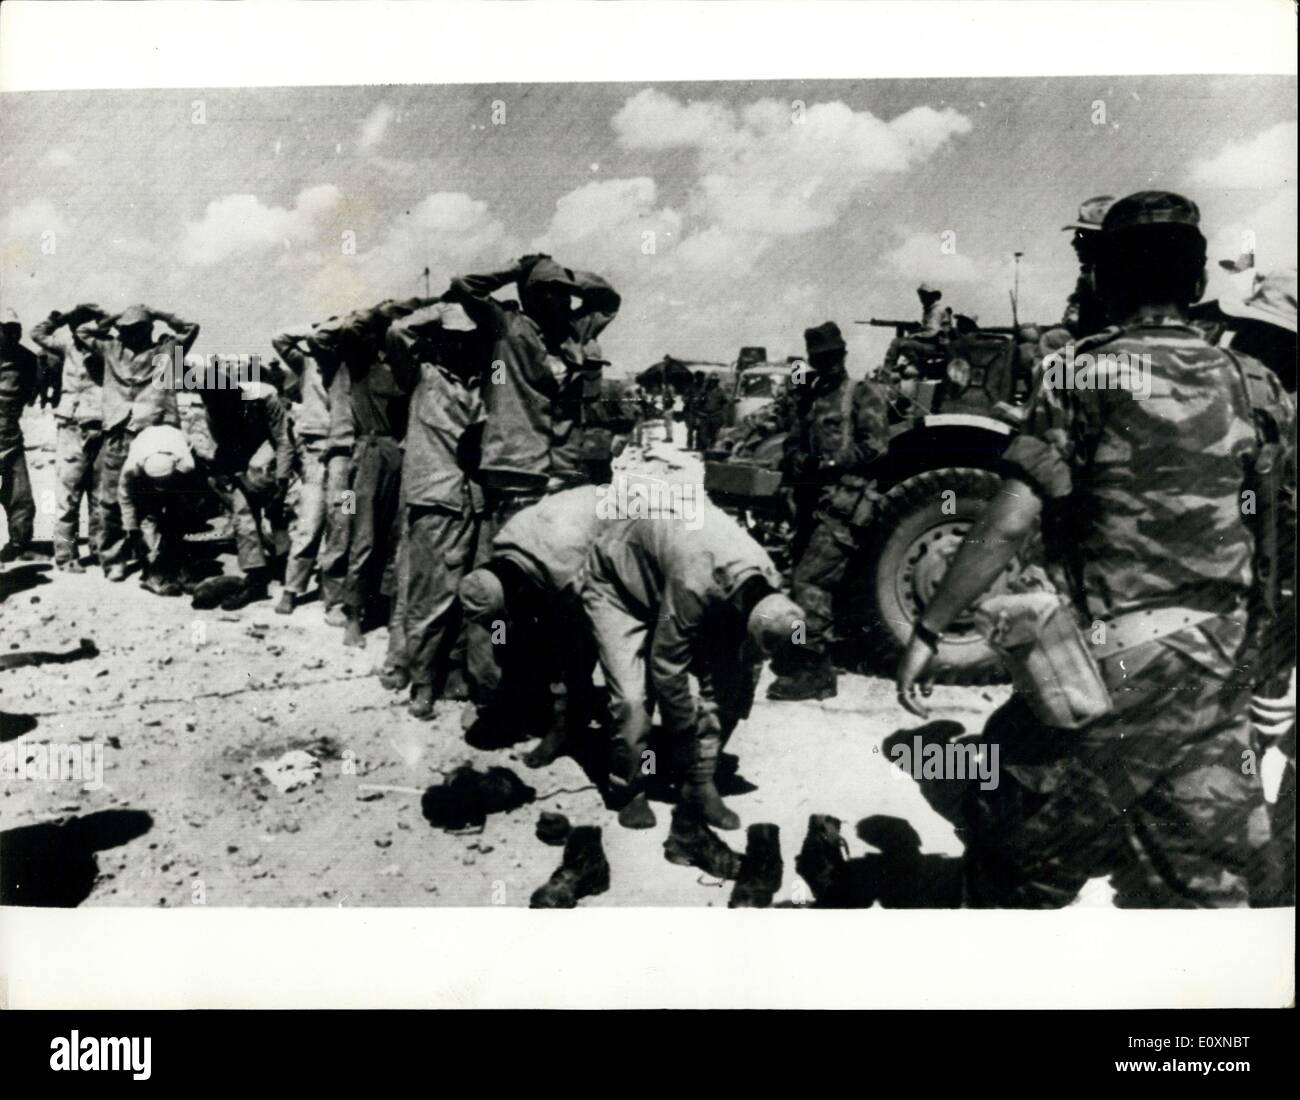 Jun. 08, 1967 - War in the Desert: Photo Shows A unit of Egyptian soldiers takes prisoners, most of them without boots which enable them to retreat faster in the desert. Stock Photo